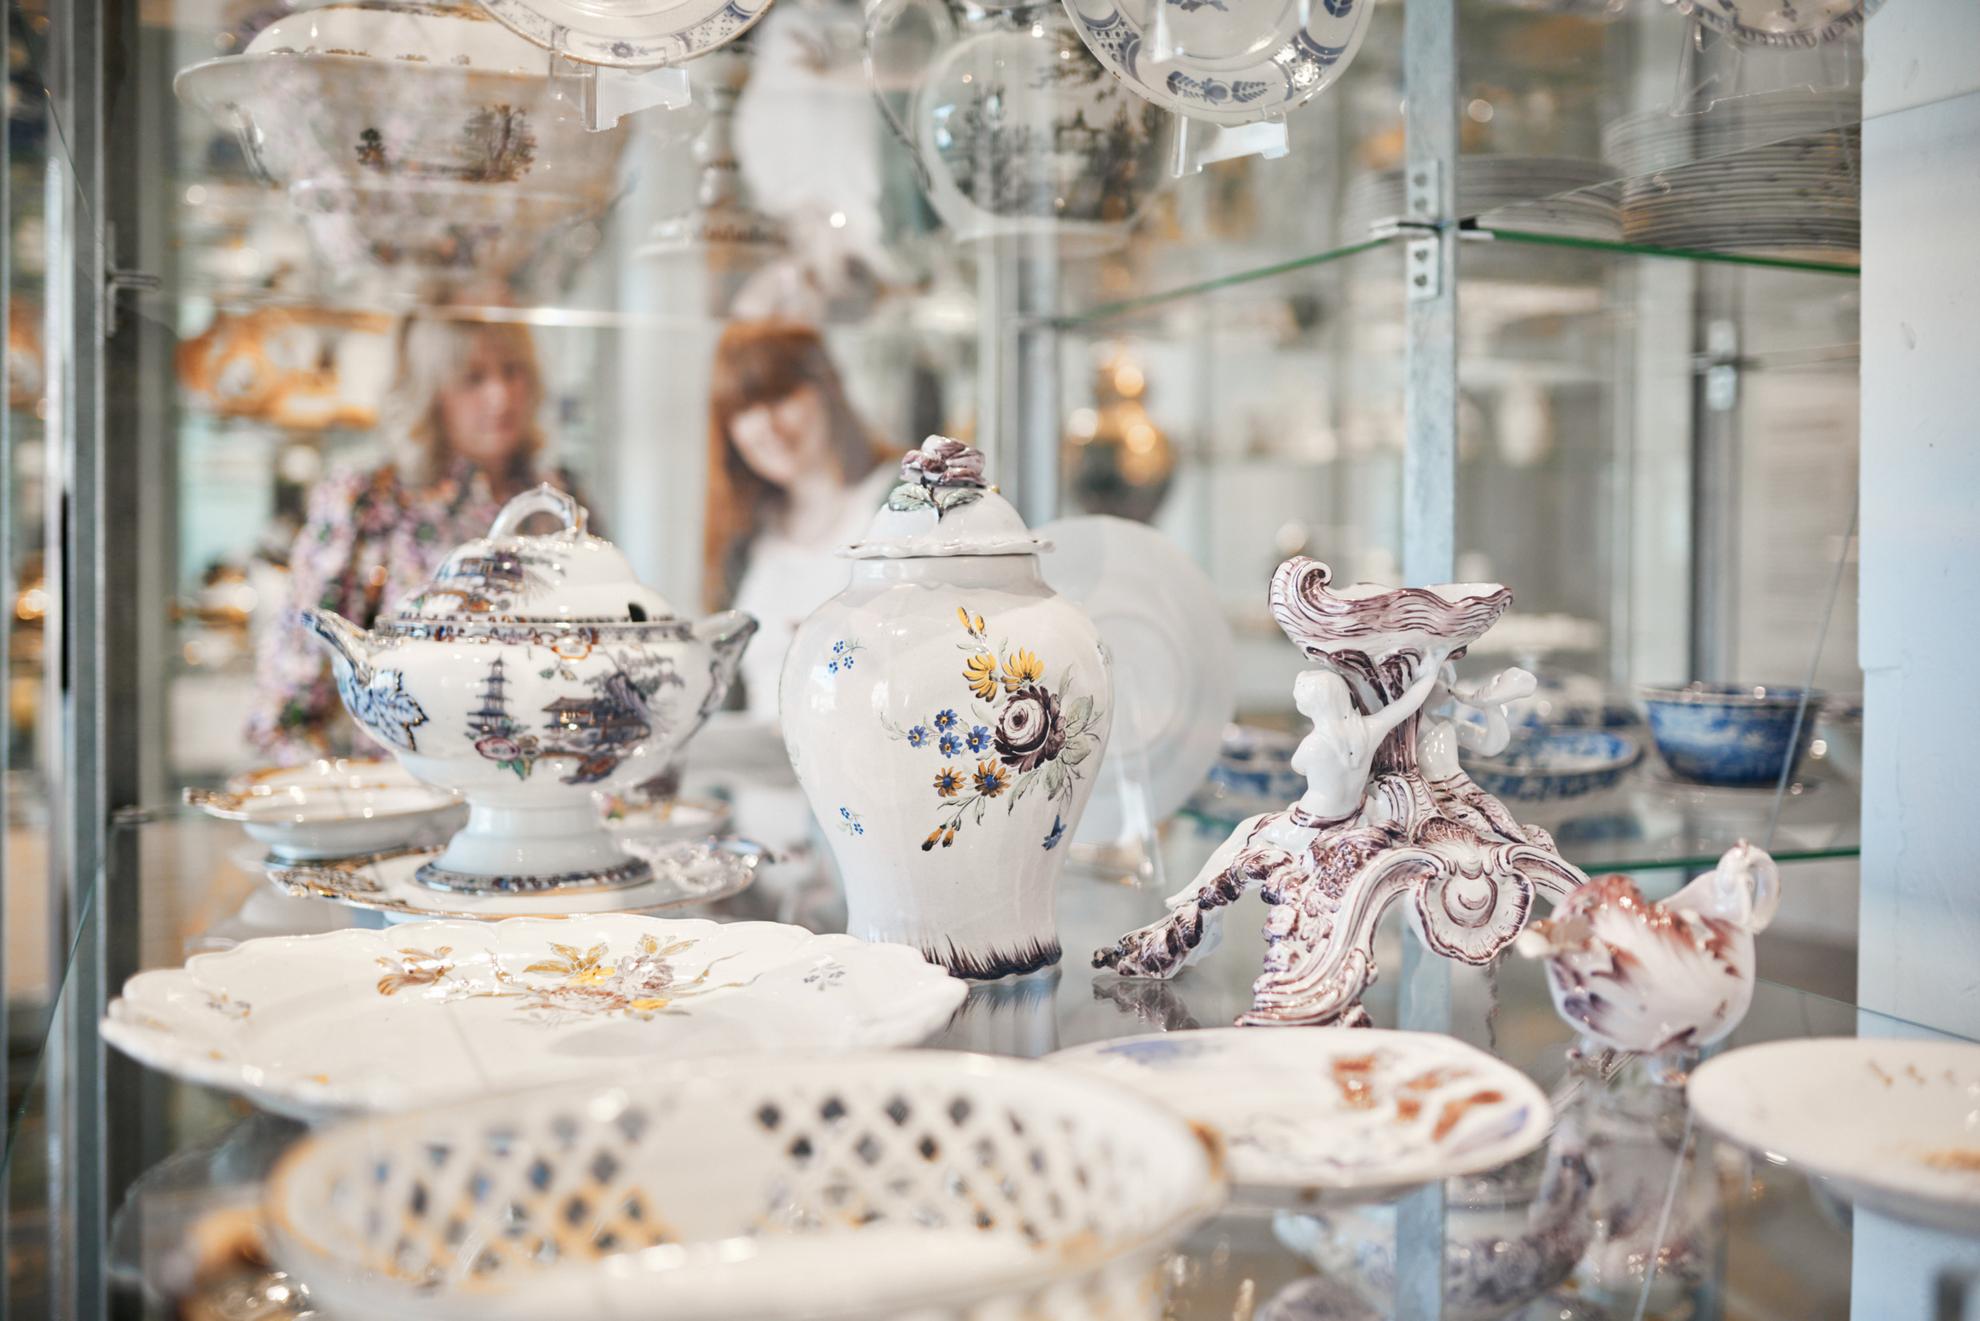 A porcelain teapot, a porcelain bowl with lid and a porcelain ornament, all placed inside a glass stand.